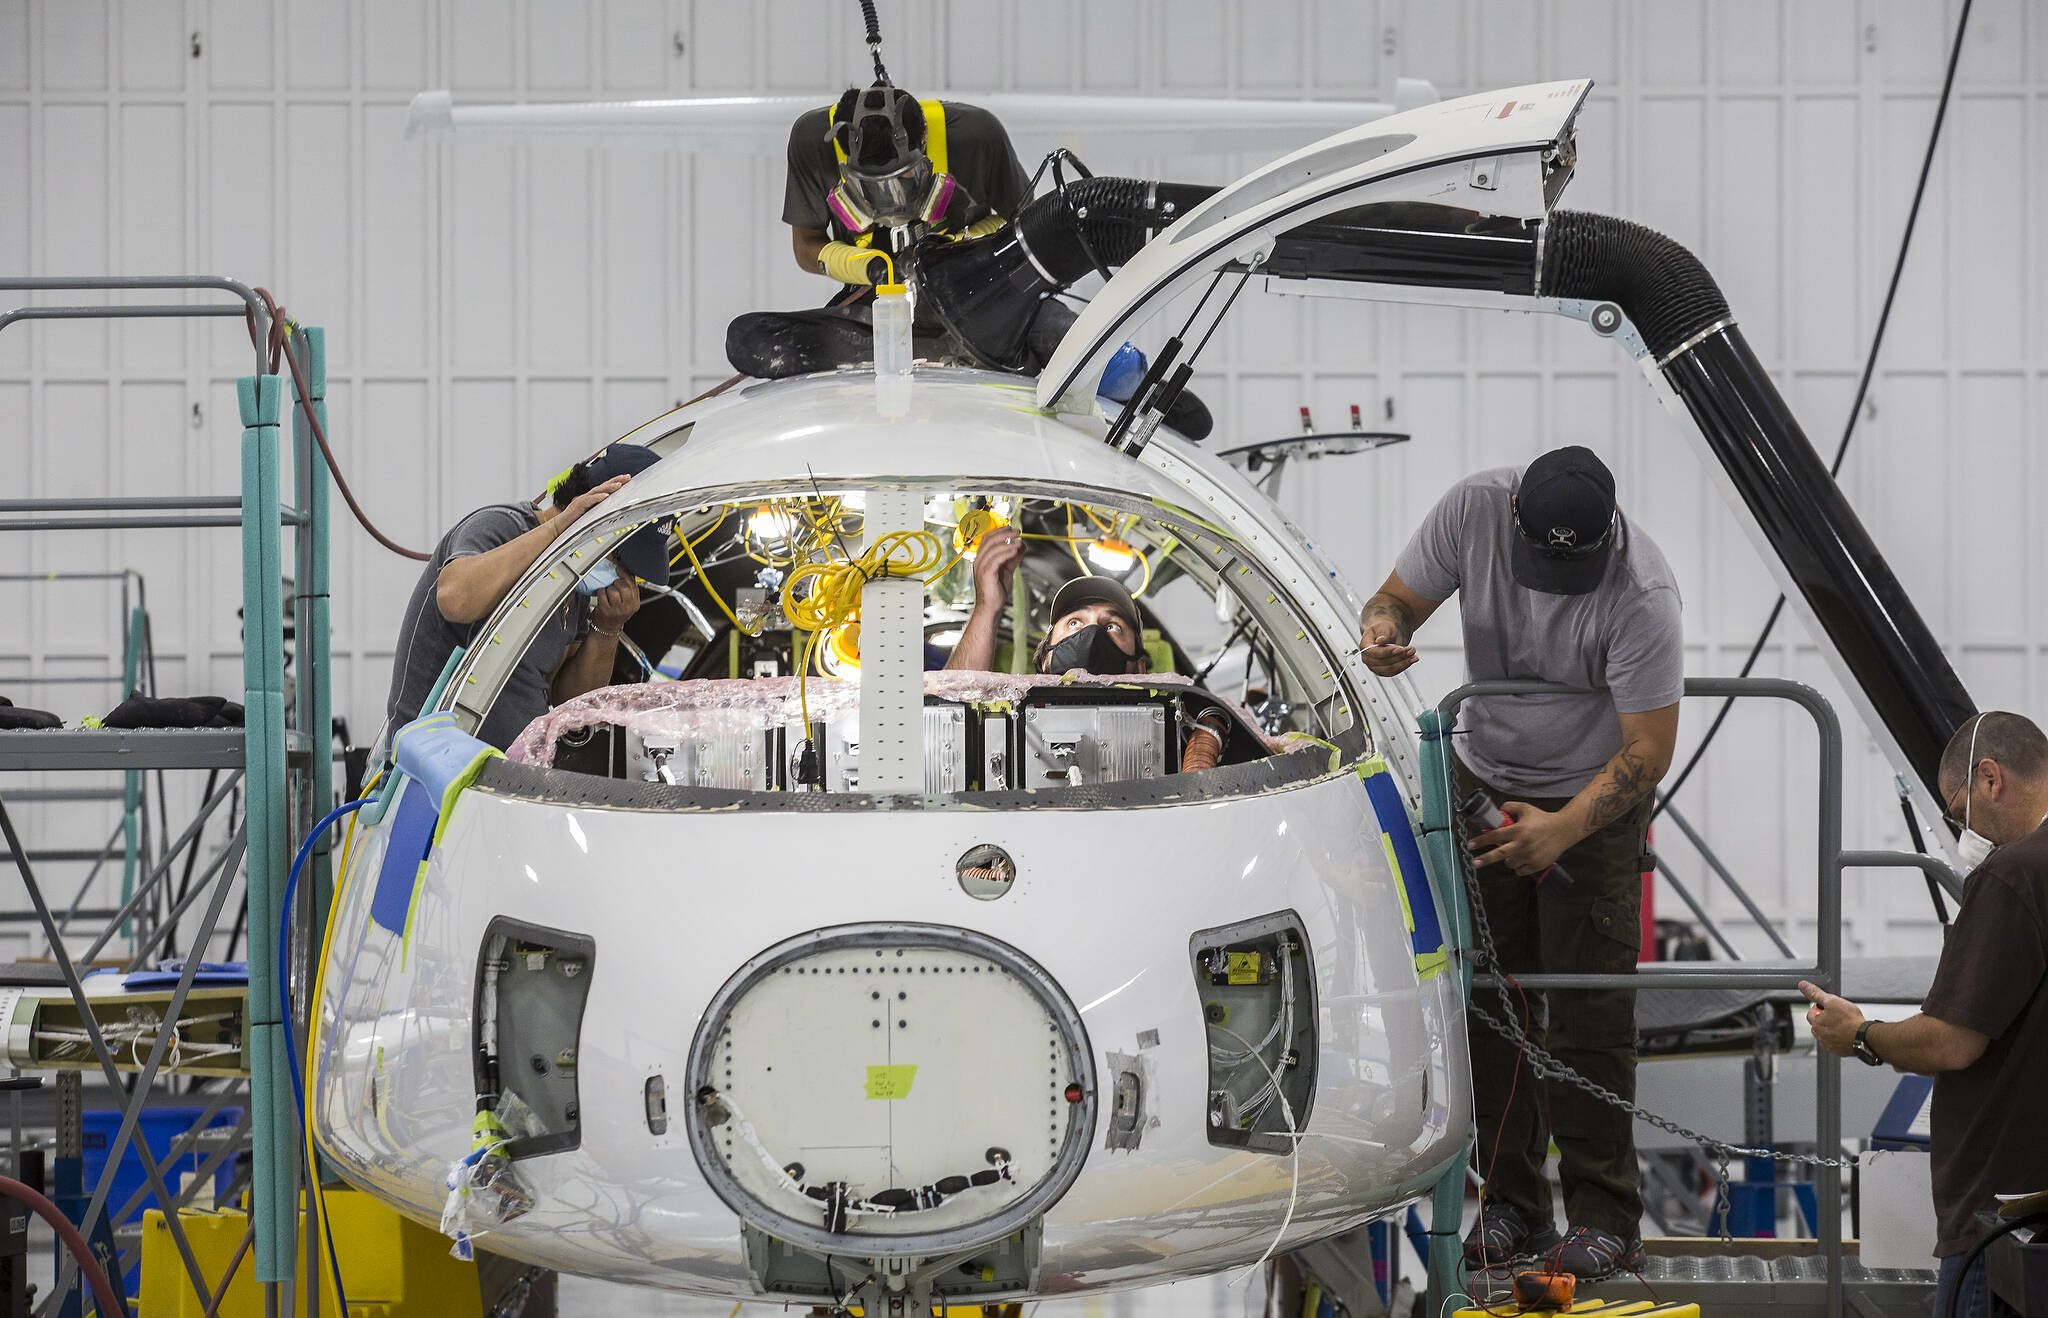 Workers build the first all-electric commuter plane, the Eviation Alice, at Eviation’s plant on Sept. 8 in Arlington. (Andy Bronson / The Herald)